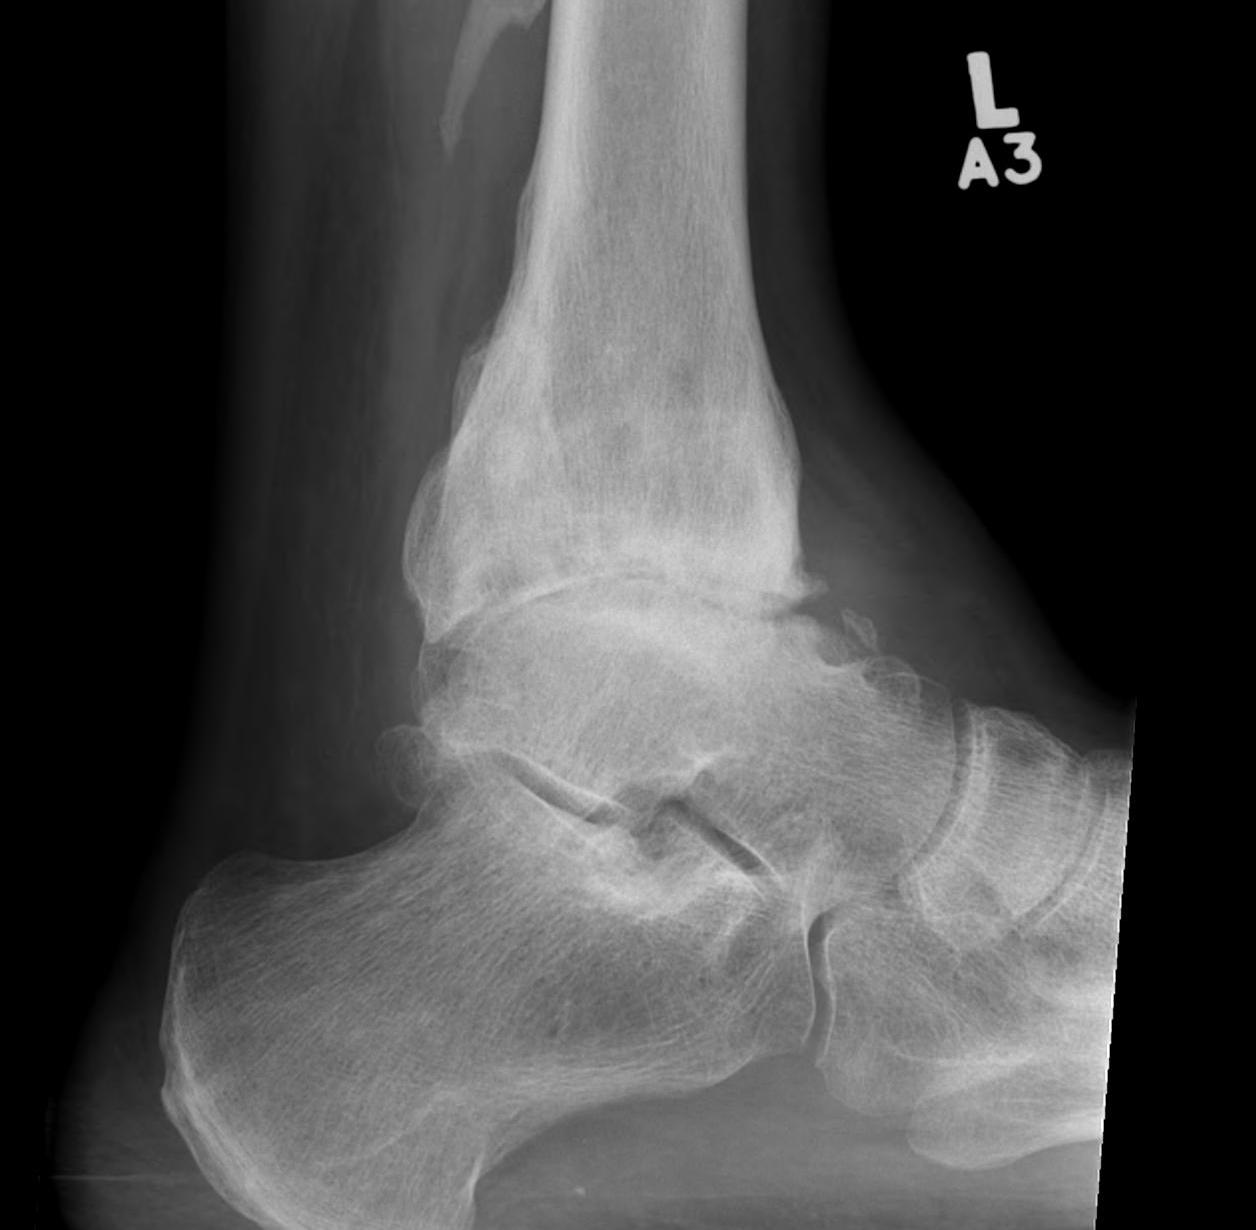 Ankle OA Lateral Xray